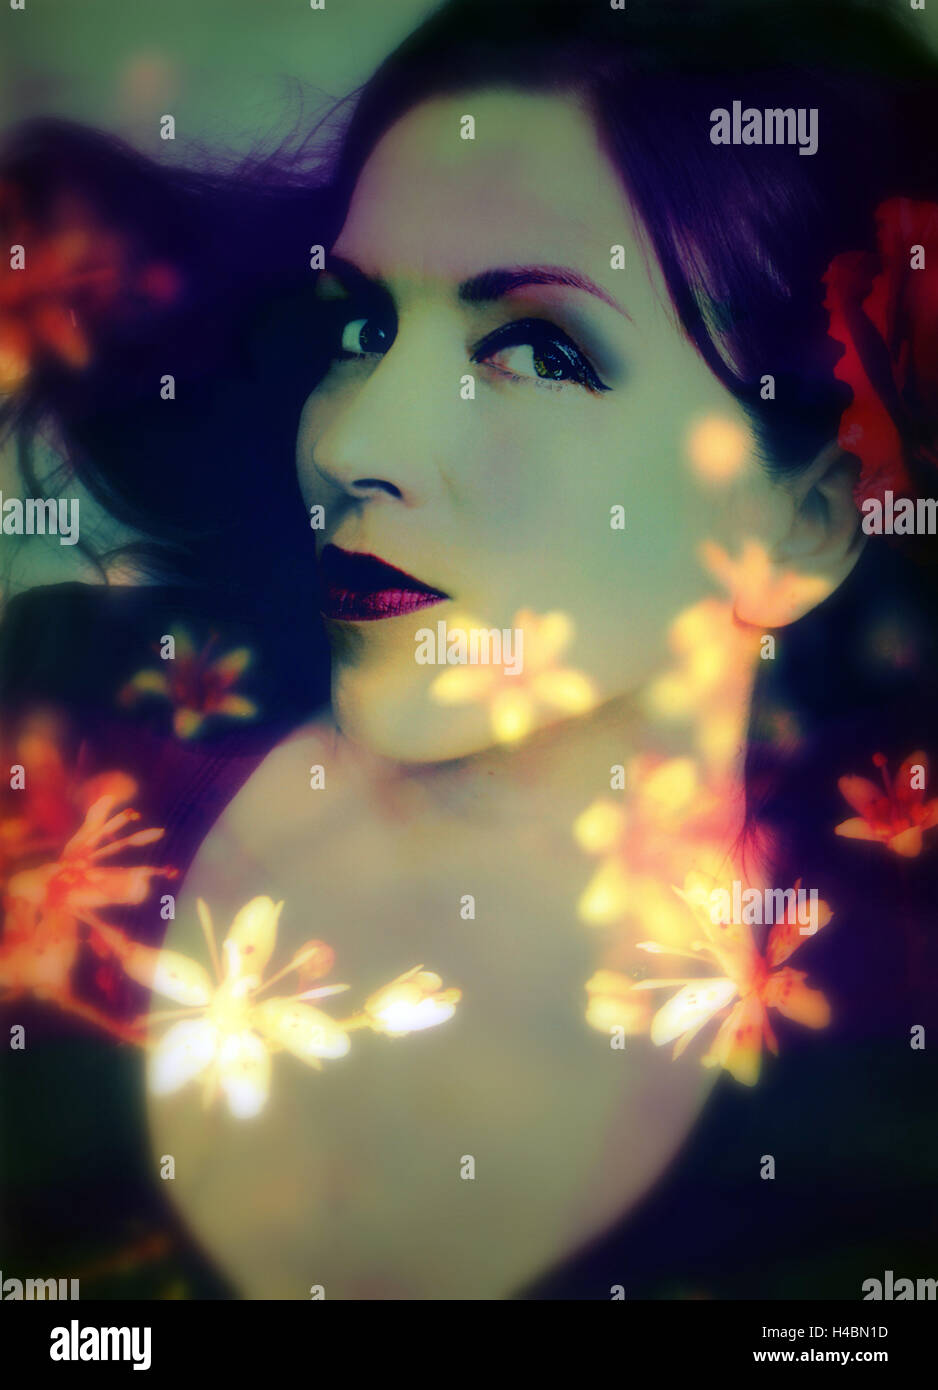 a moody evening portrait of a woman with bright flower appearence Stock Photo